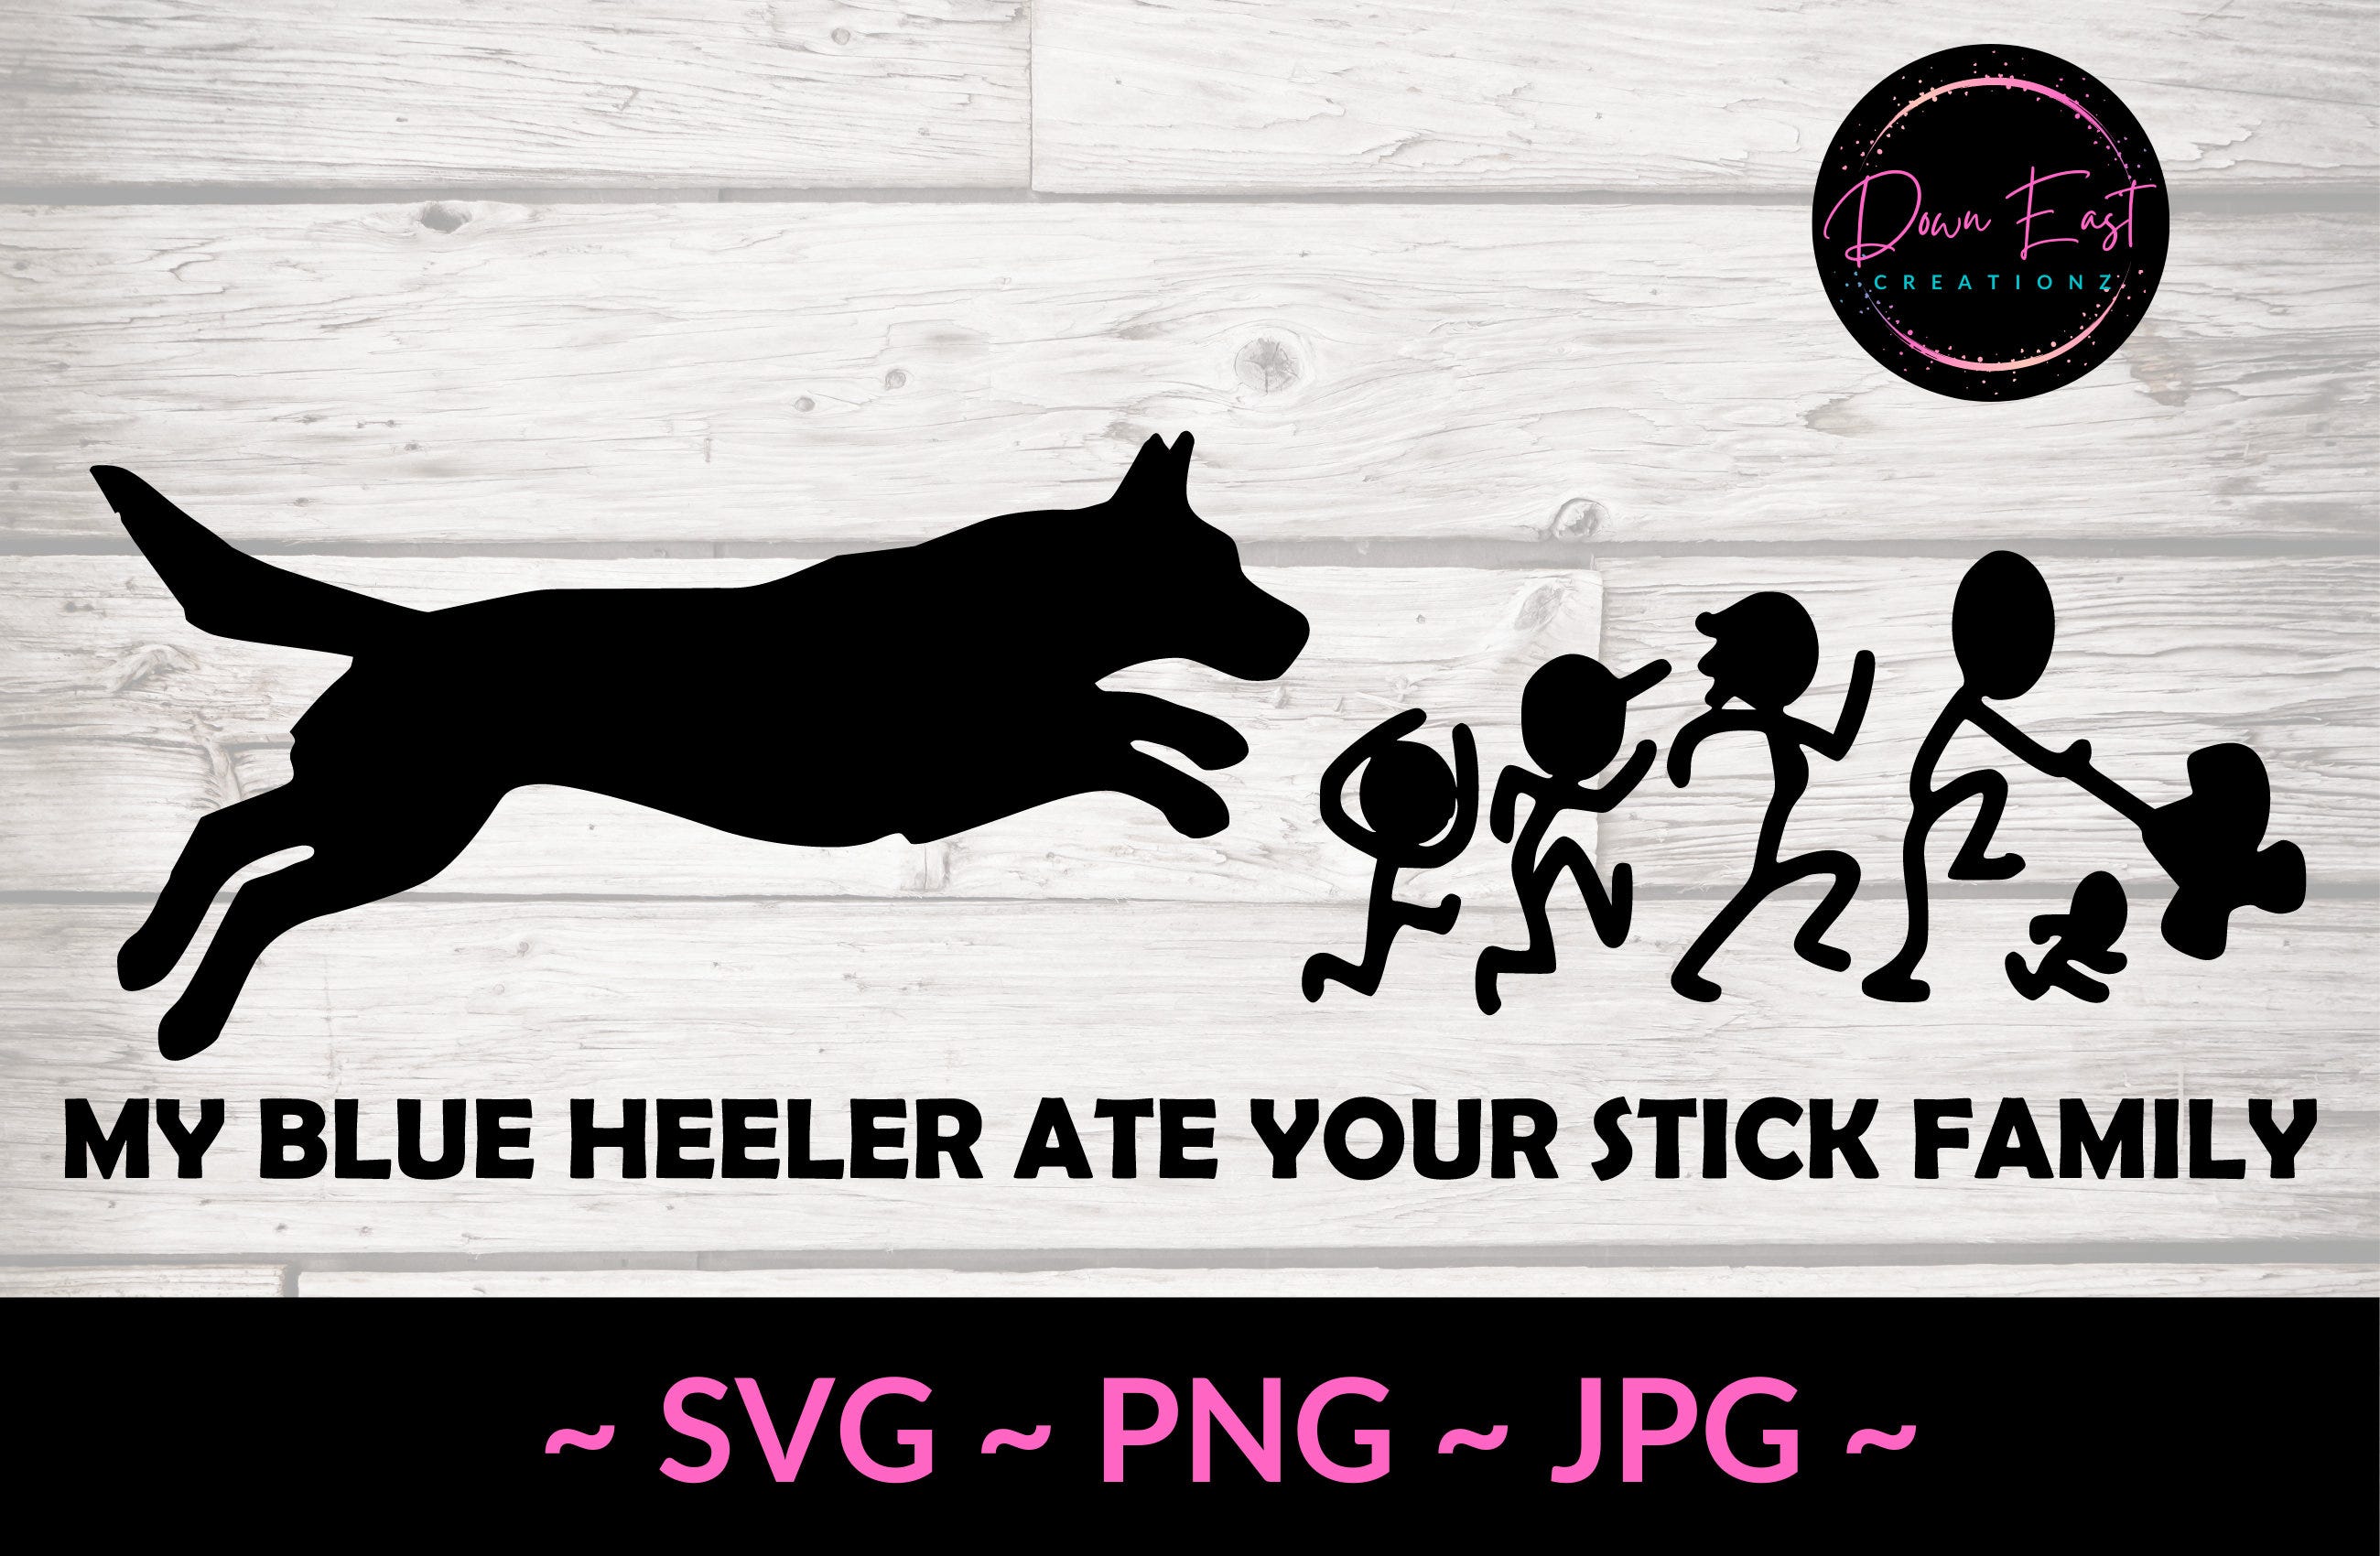 My BLUE HEELER ate your Stick Family SVG  Cut FIle for Cricut / Silhouette  Cameo Cutting Machine / Car Decal /